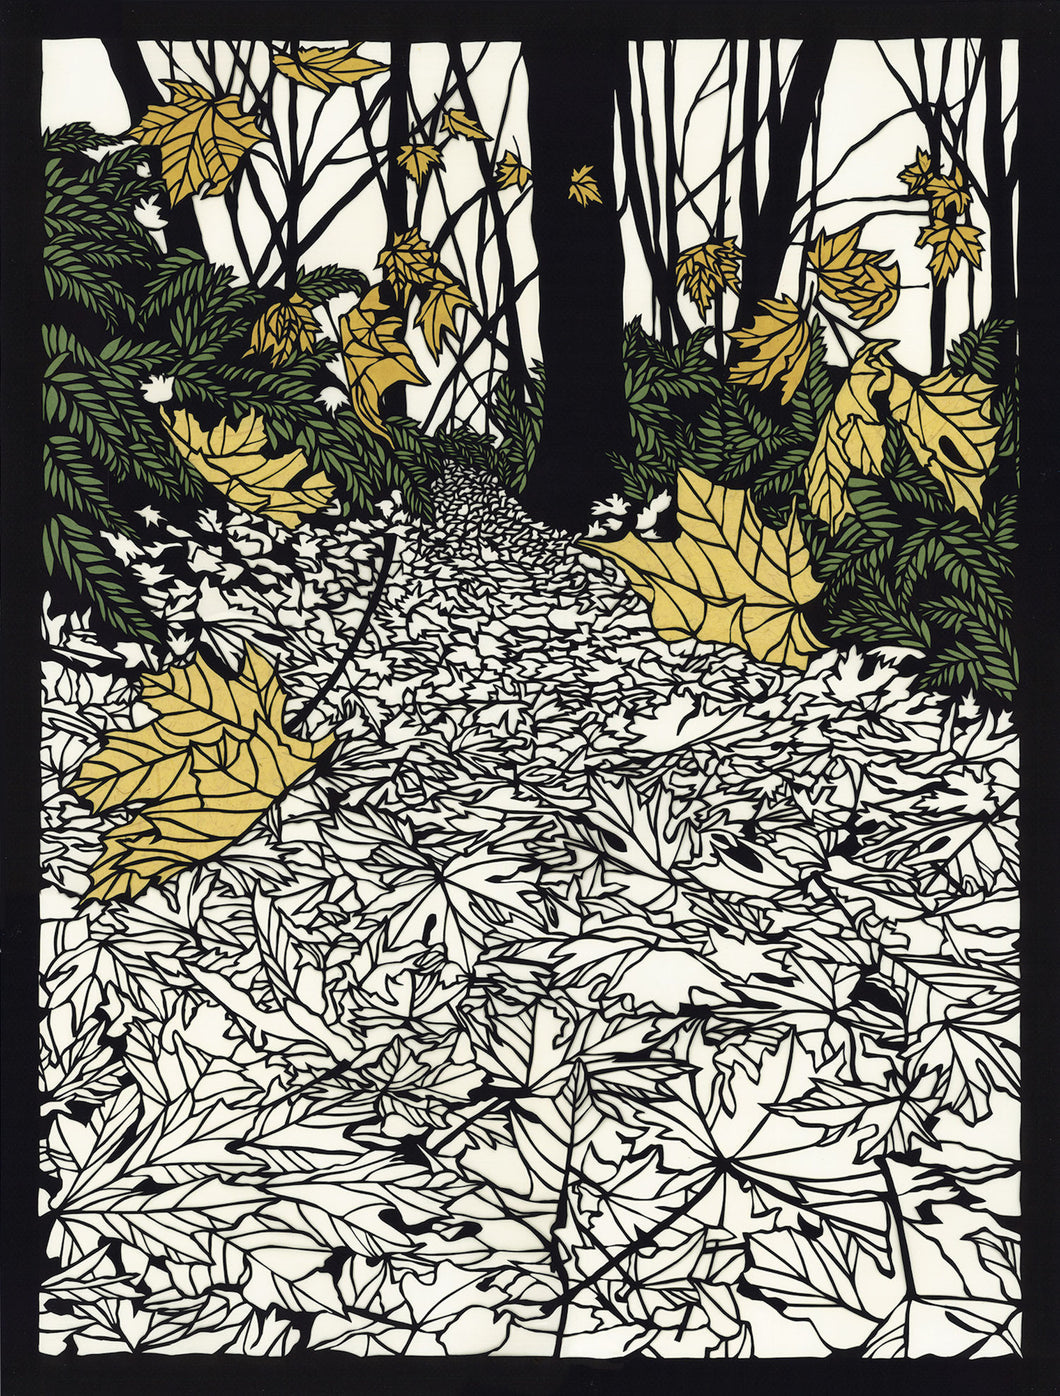 Greeting Card- #104 The Sound of Leaves Falling